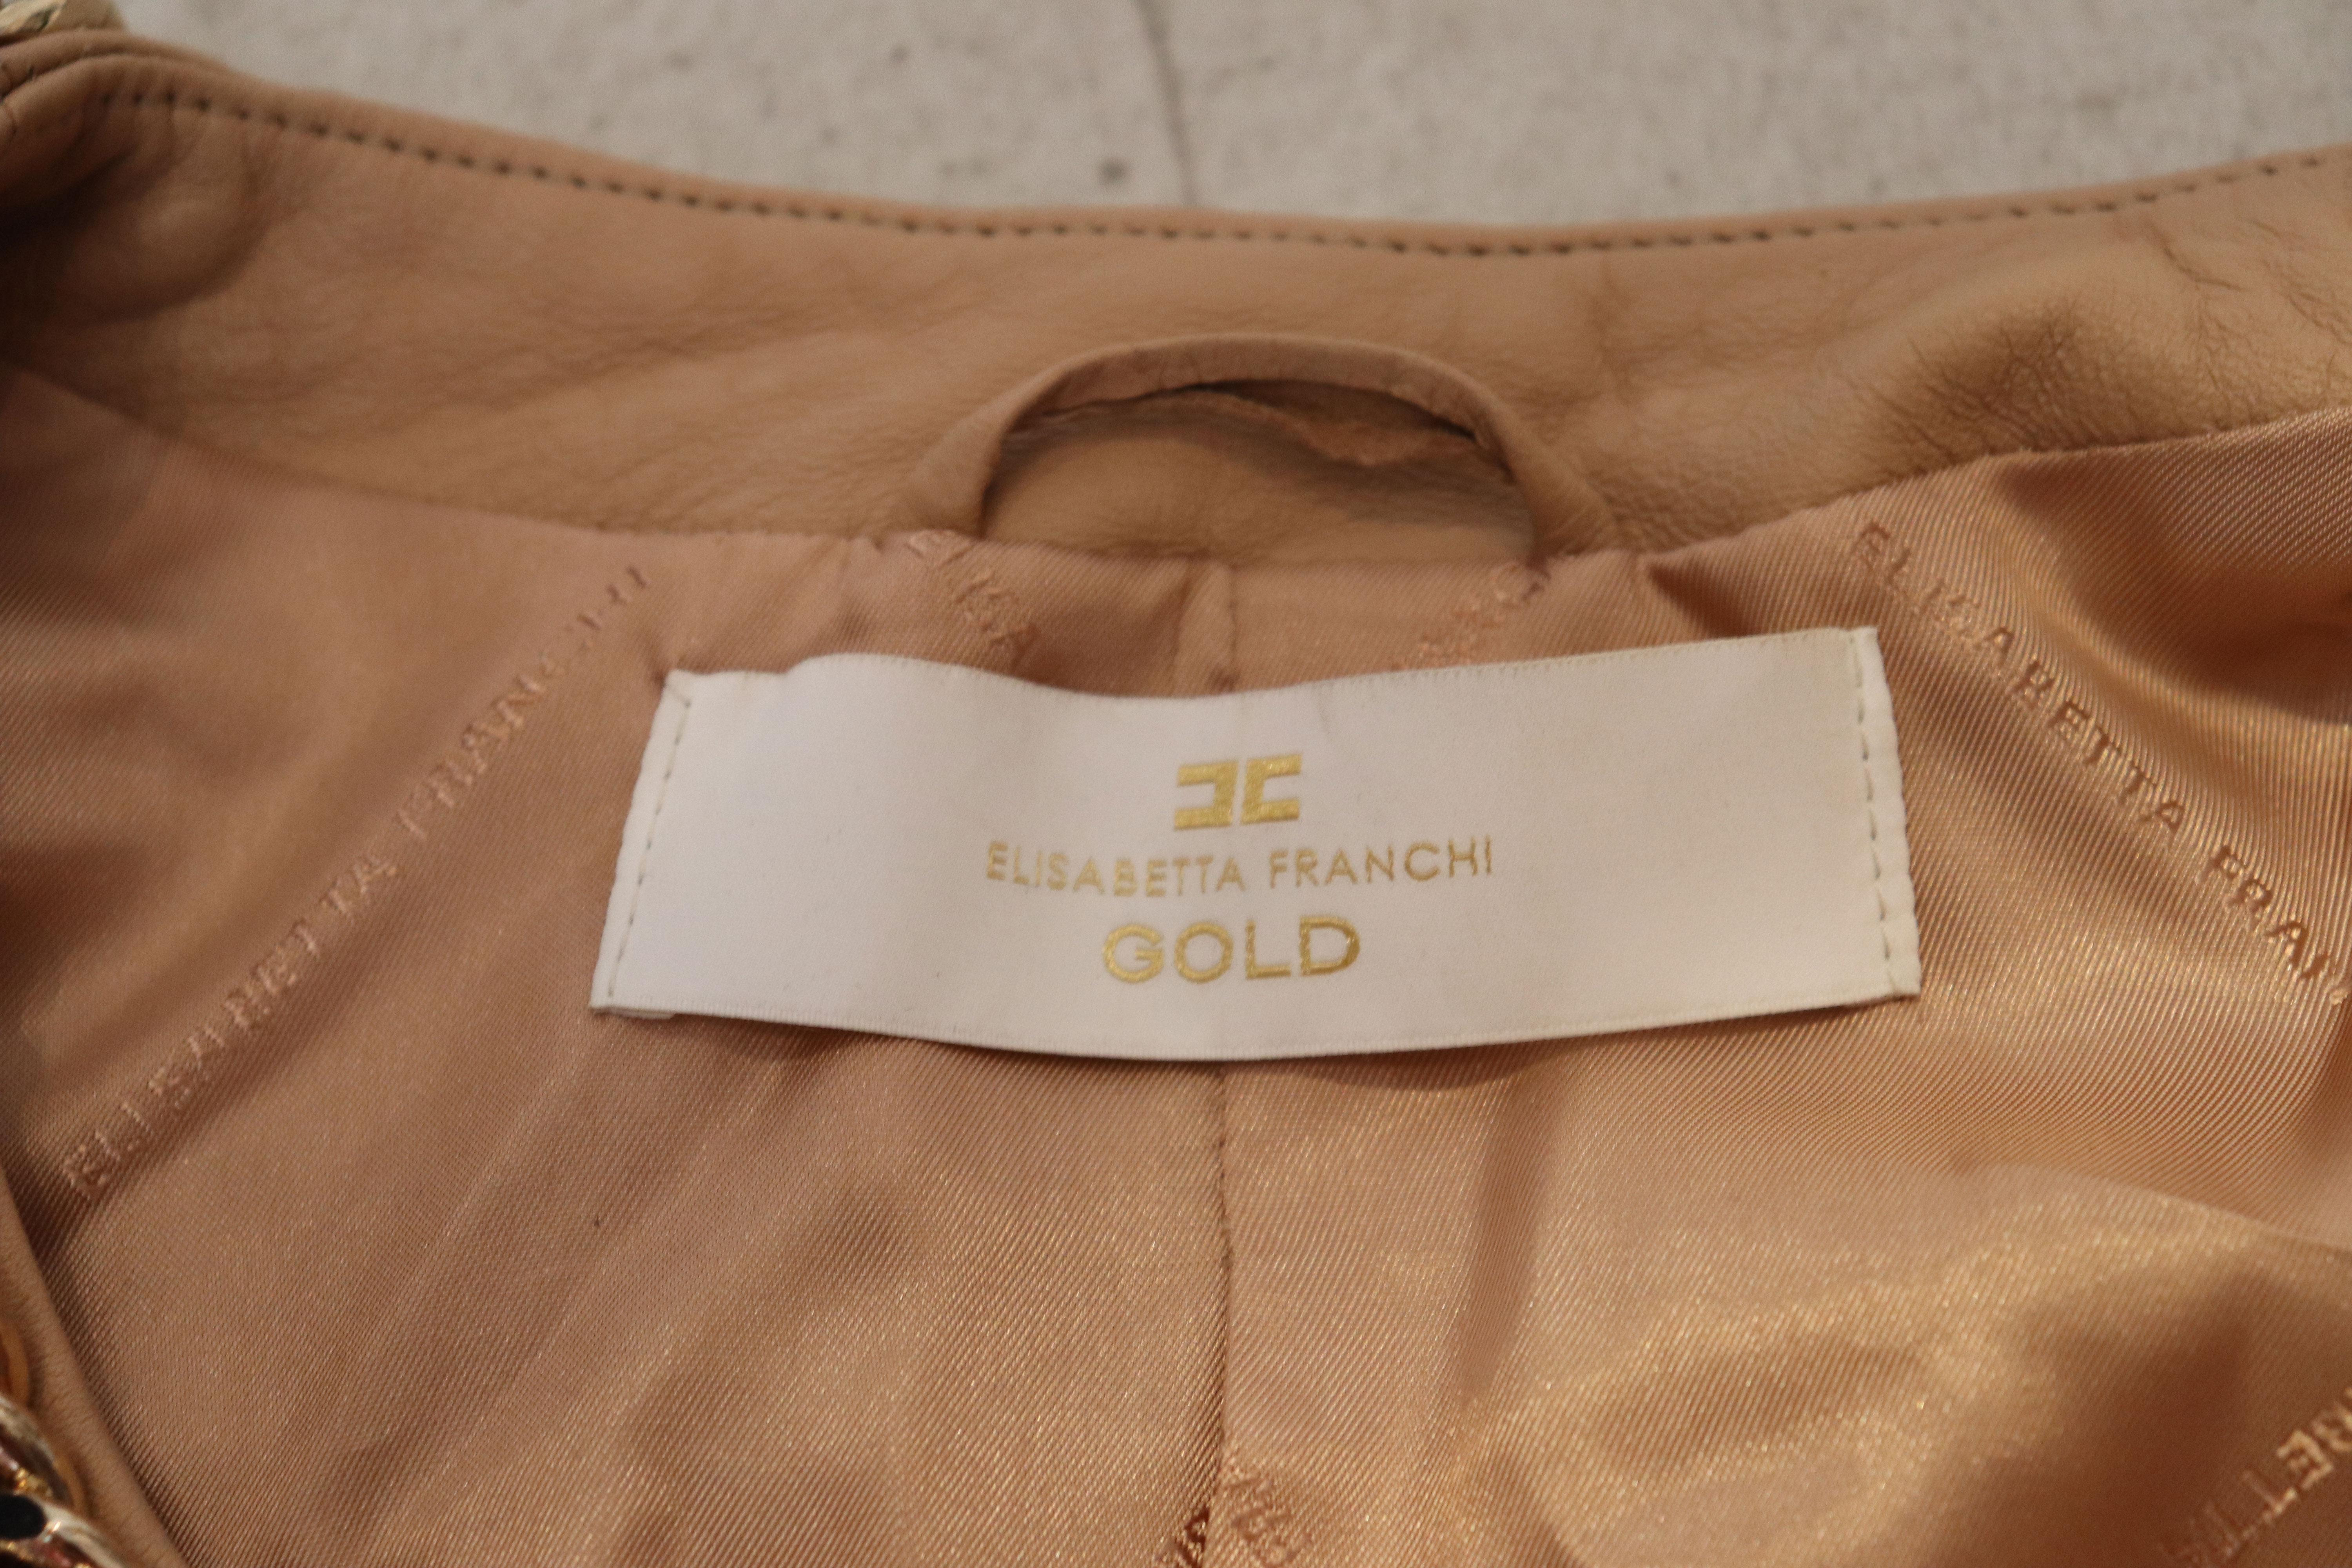 A super soft leather bolero/short jacket by Elisabetta Franchi. In a biscuit colour leather with chain detail around the neck and front. The jacket fastens with hoooks and eyes,has ruffle edged sleaves and is fully lined.